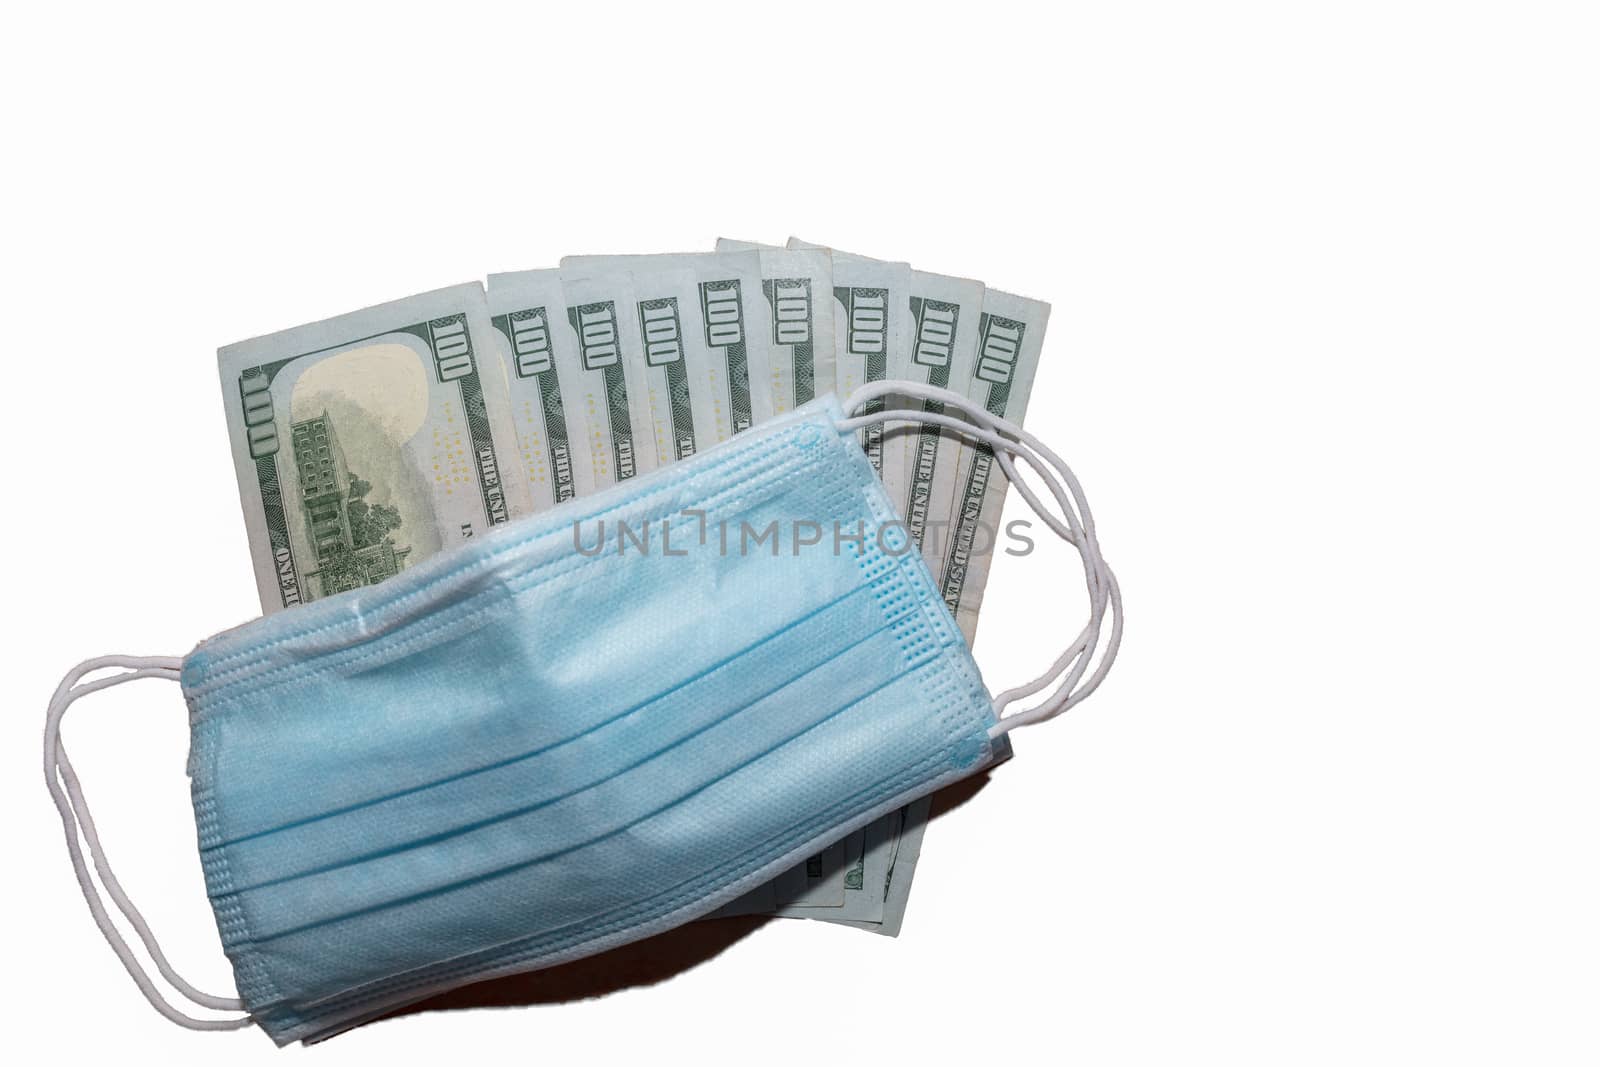 Facial protective surgical masks on top of a few hundred dollar bills. Isolated. White background. Expensive protection against viruses and bacteria.